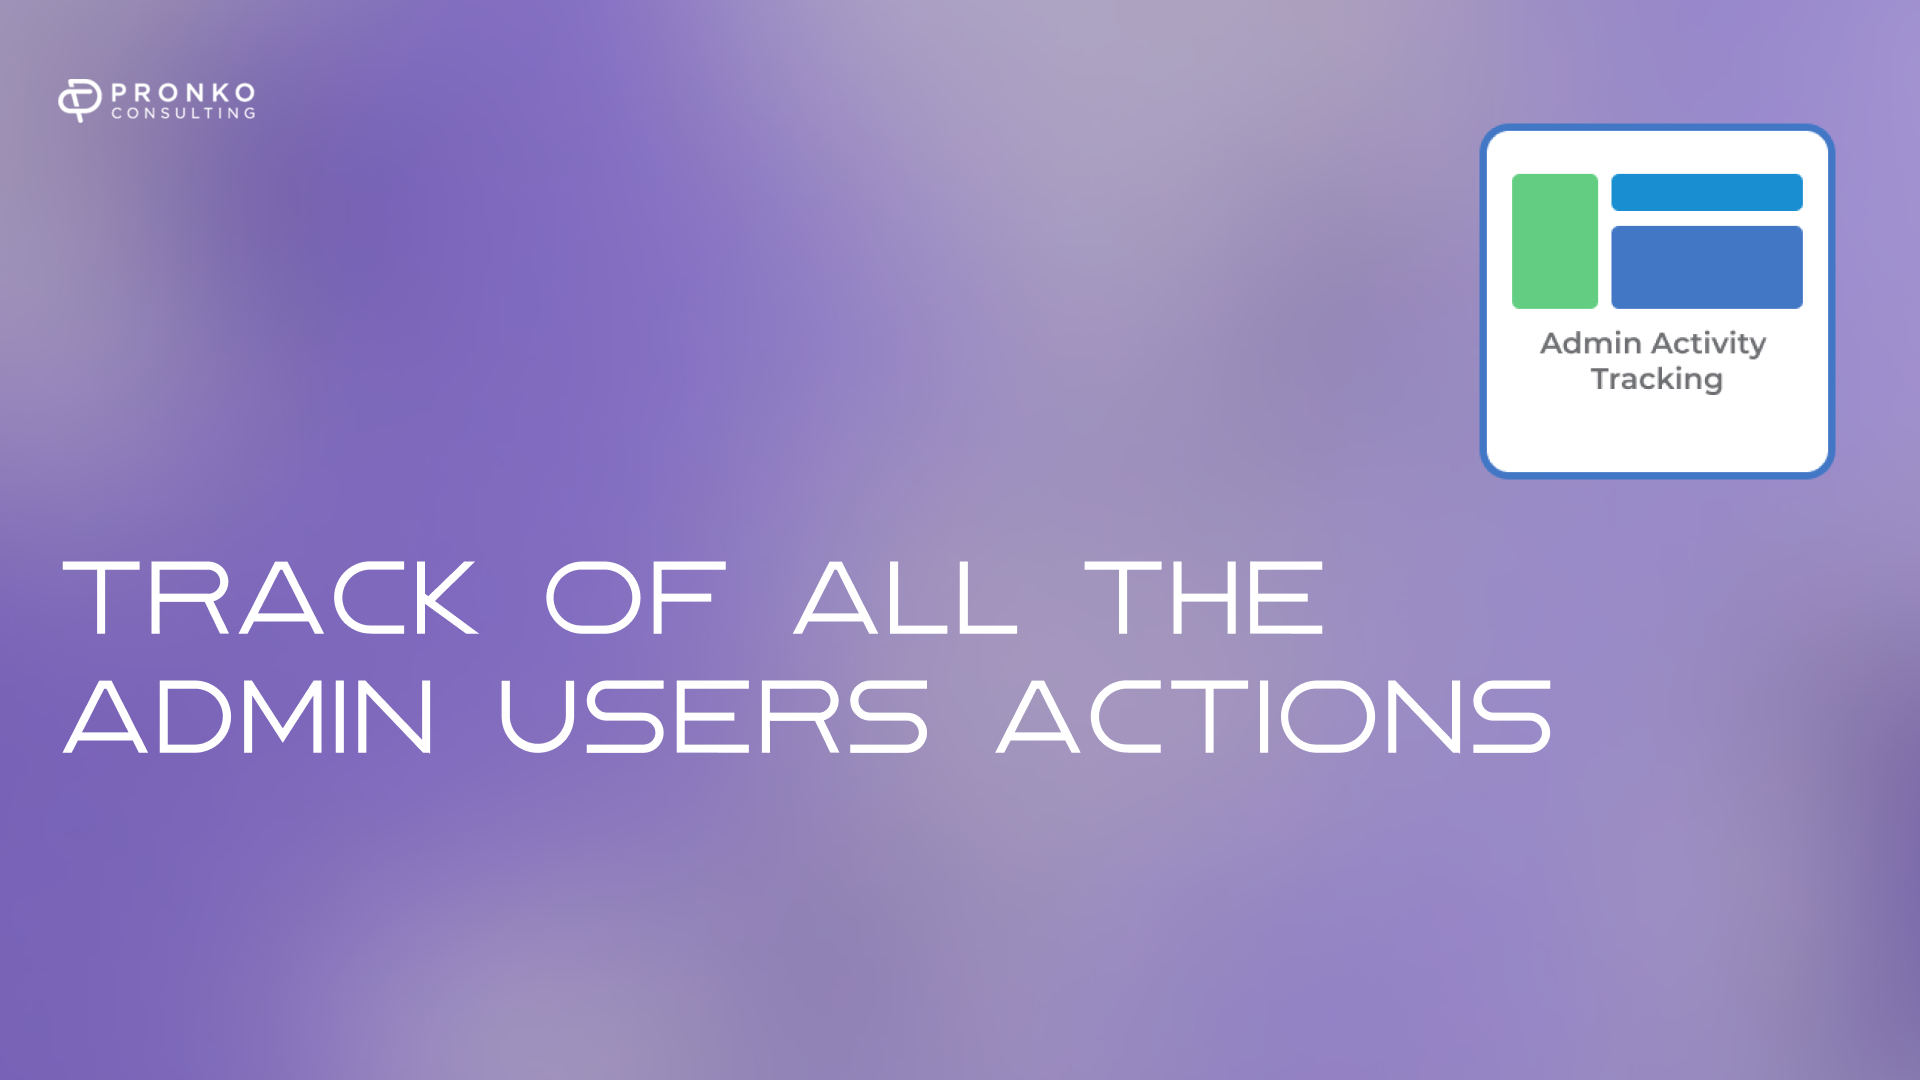 Track the activity of user administrators in the online store with one service!